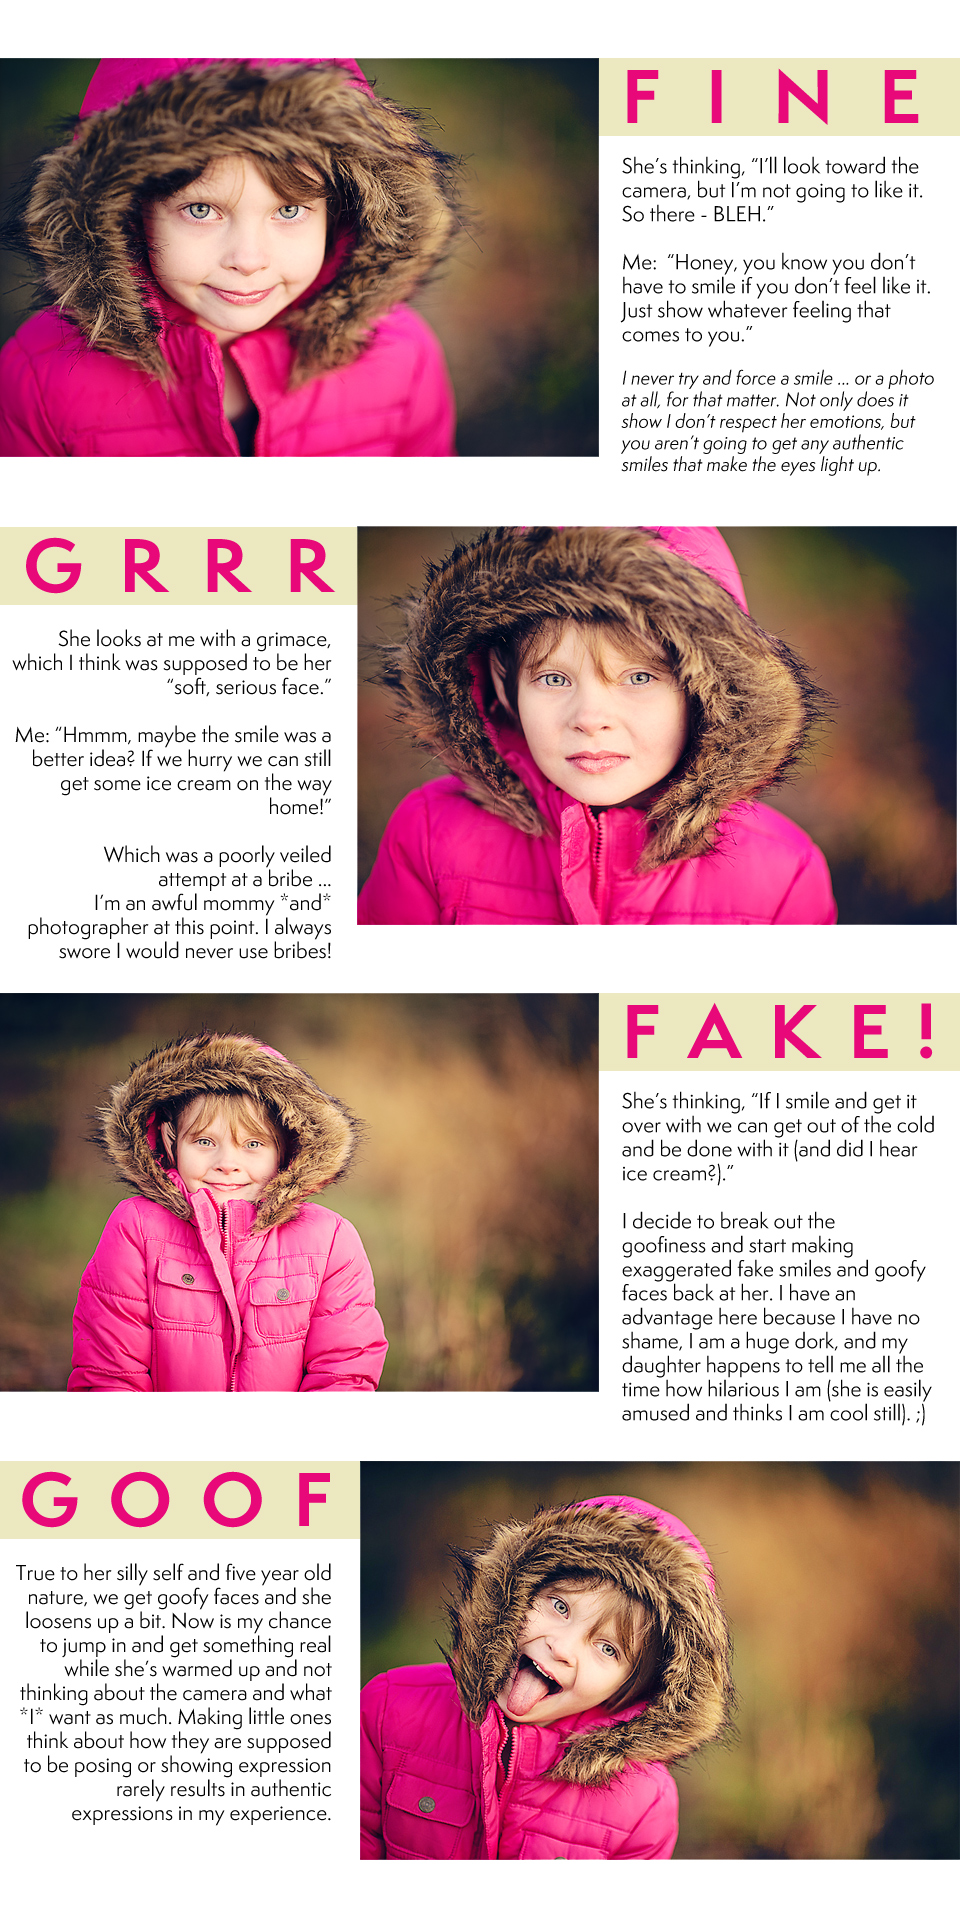 Photoshop Actions Getting Kids to Smile Photos Tips Tricks Capturing Expressions Emotion Real Elements